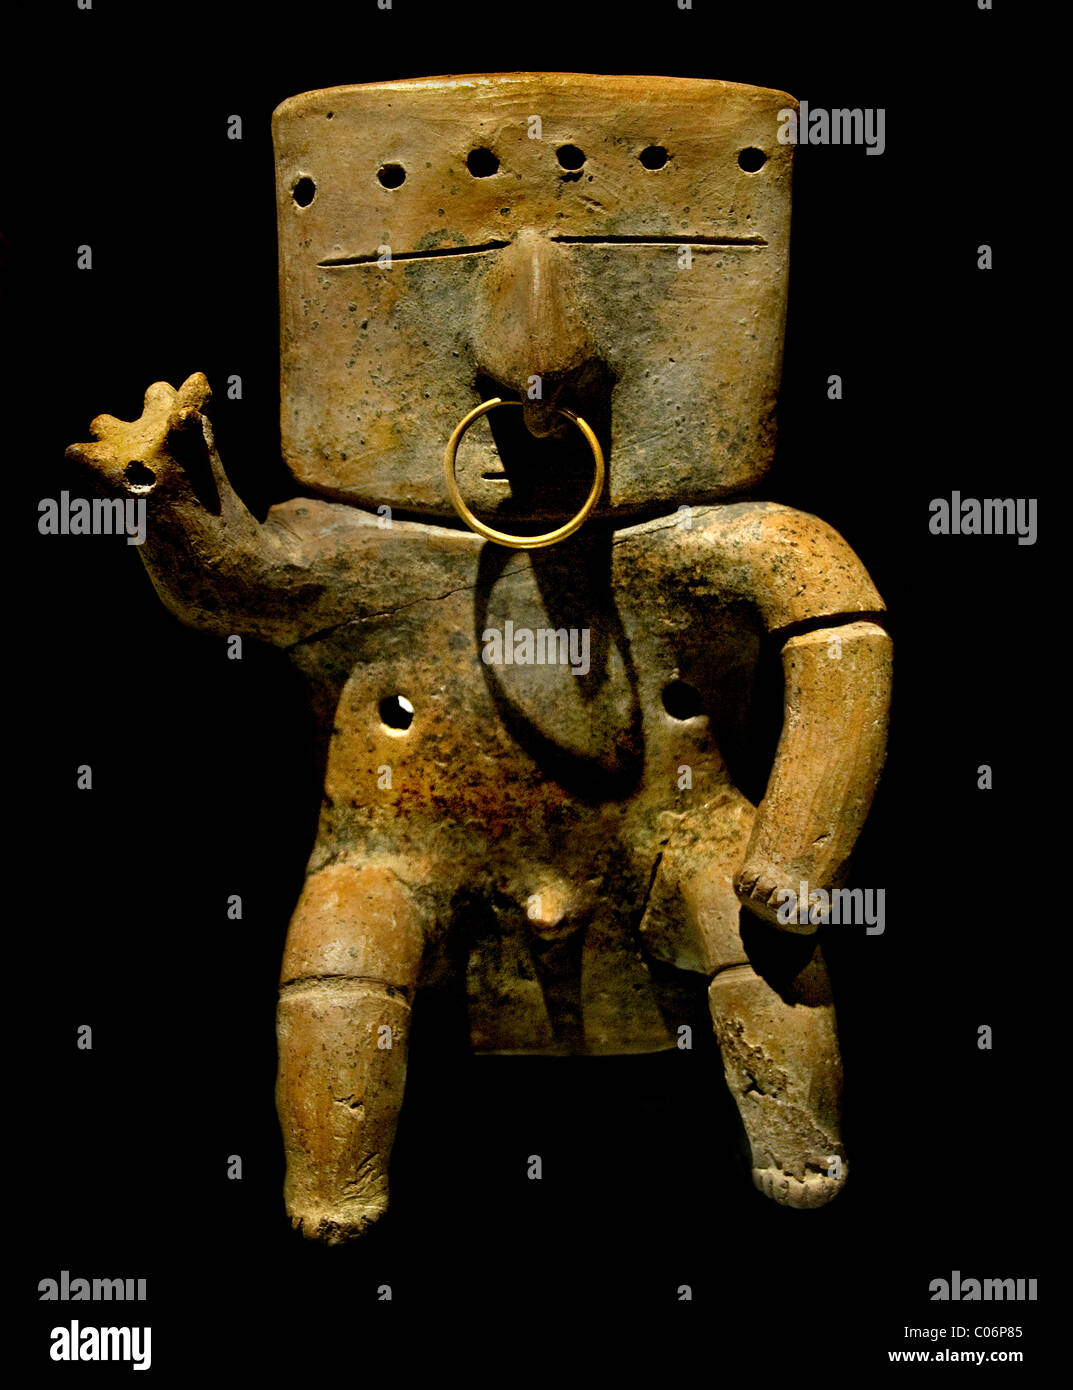 Human Figure Quimbaya culture gold ceramic and integration period 1200 1500 AD Colombia Stock Photo